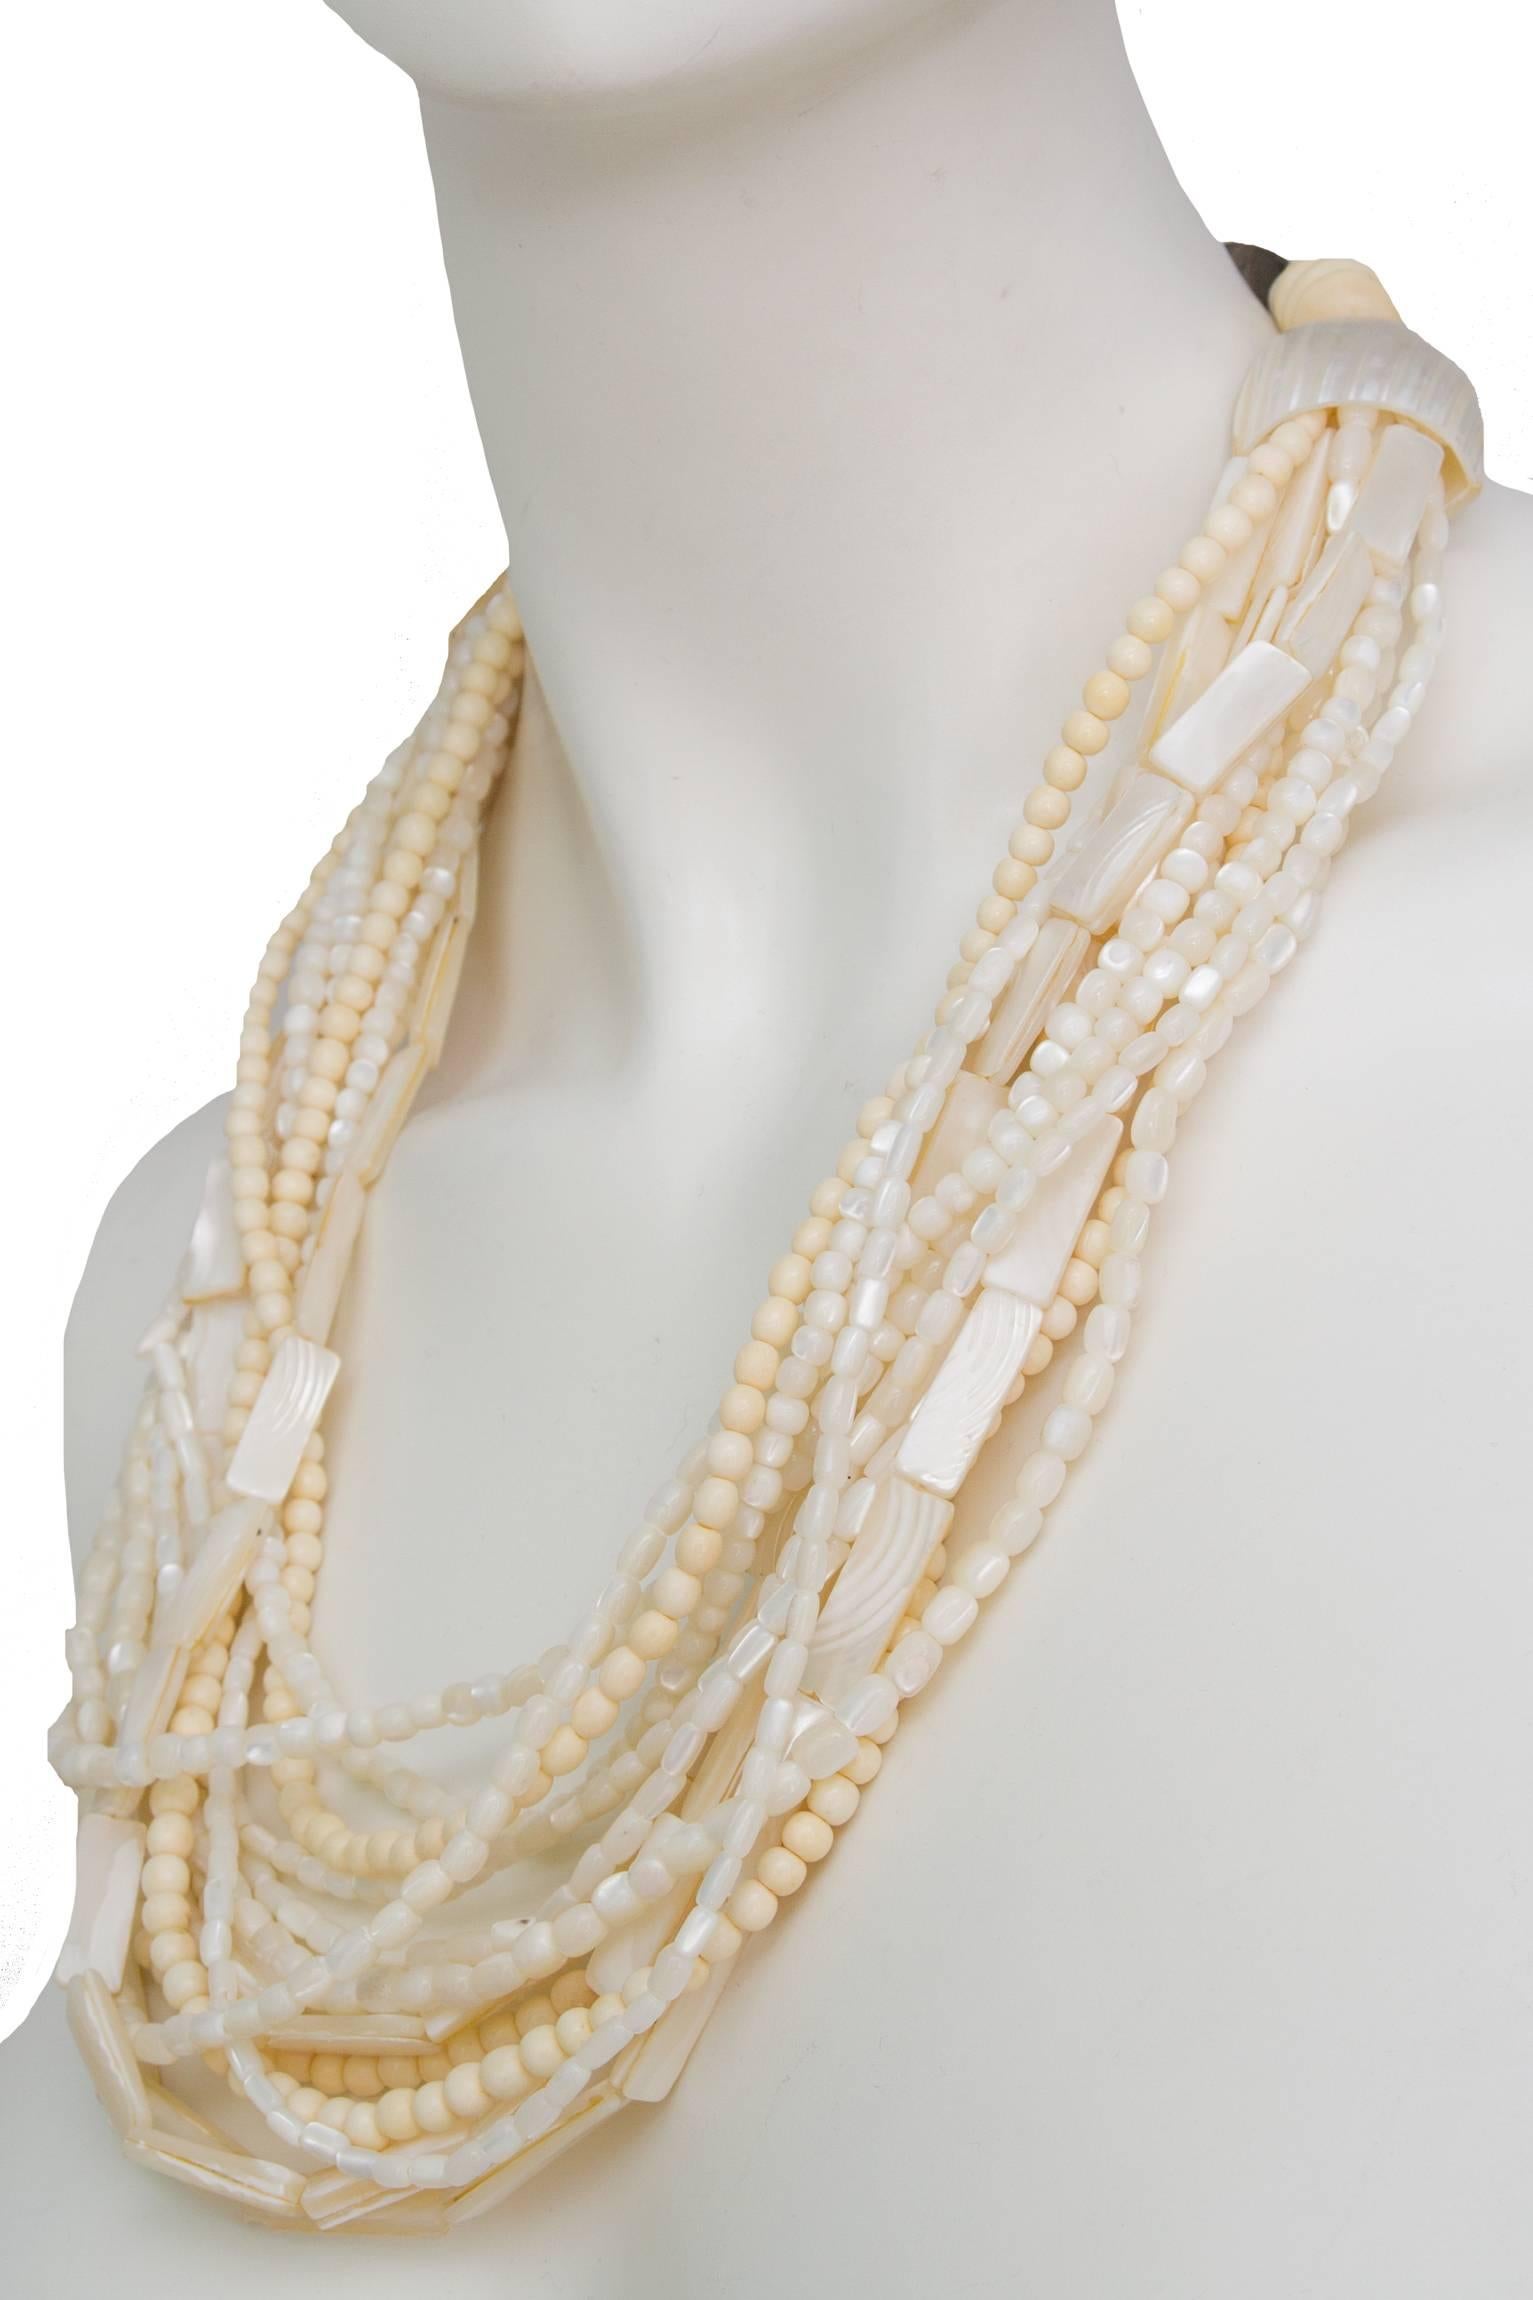 A 1980s Gerda Lyngaard for Monies mother-of-pearl beaded necklace with multiple strands of beads in varying shapes and sizes. The strands are gathered at the back in a large mother-of-pearl shell and fastened by beads to a large s-shaped closure.